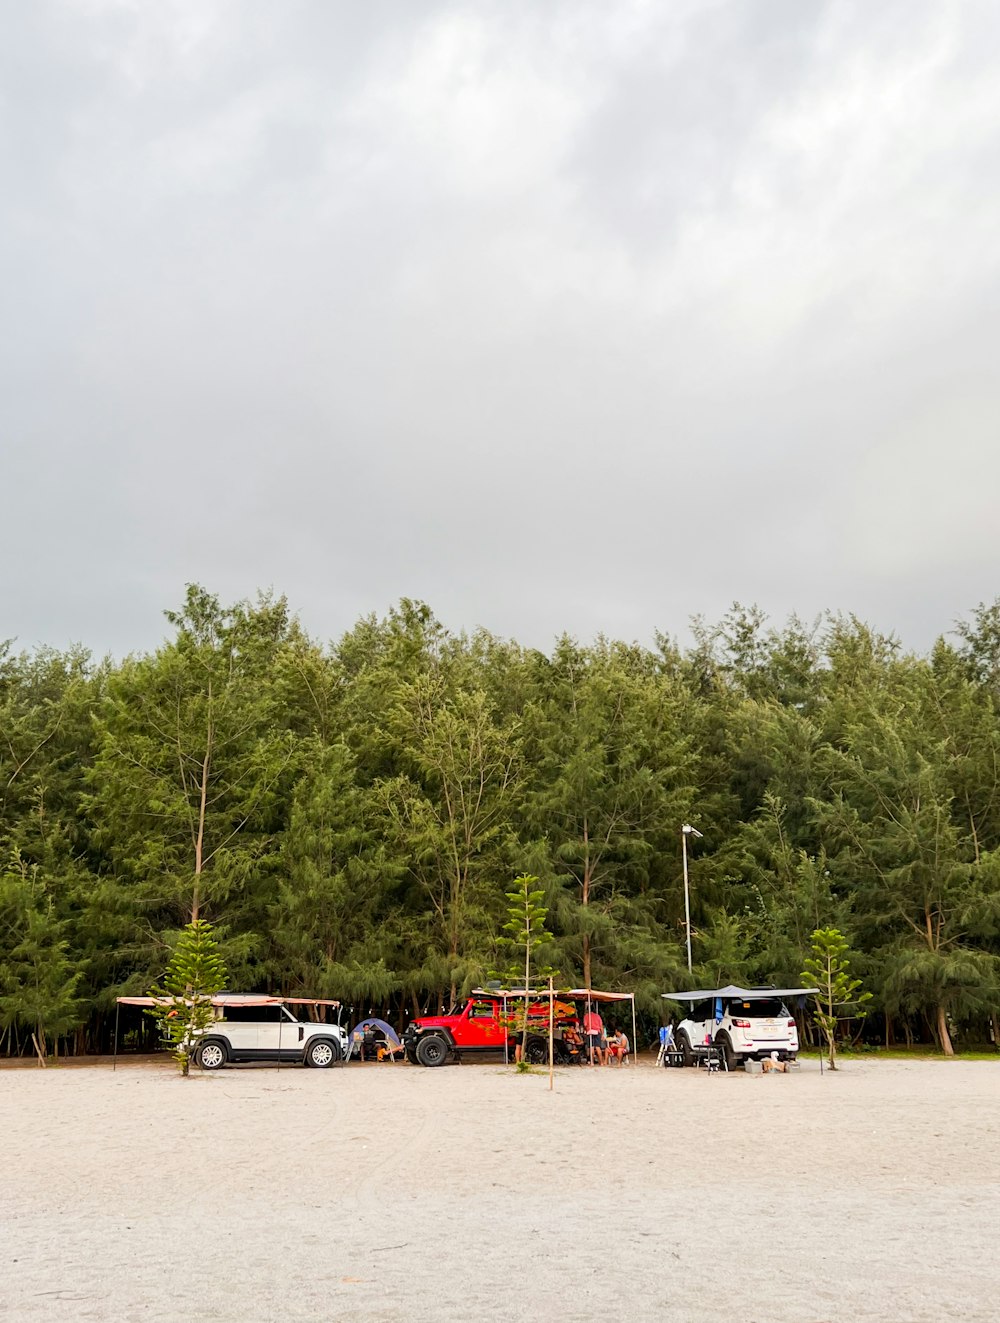 a group of vehicles parked next to some trees